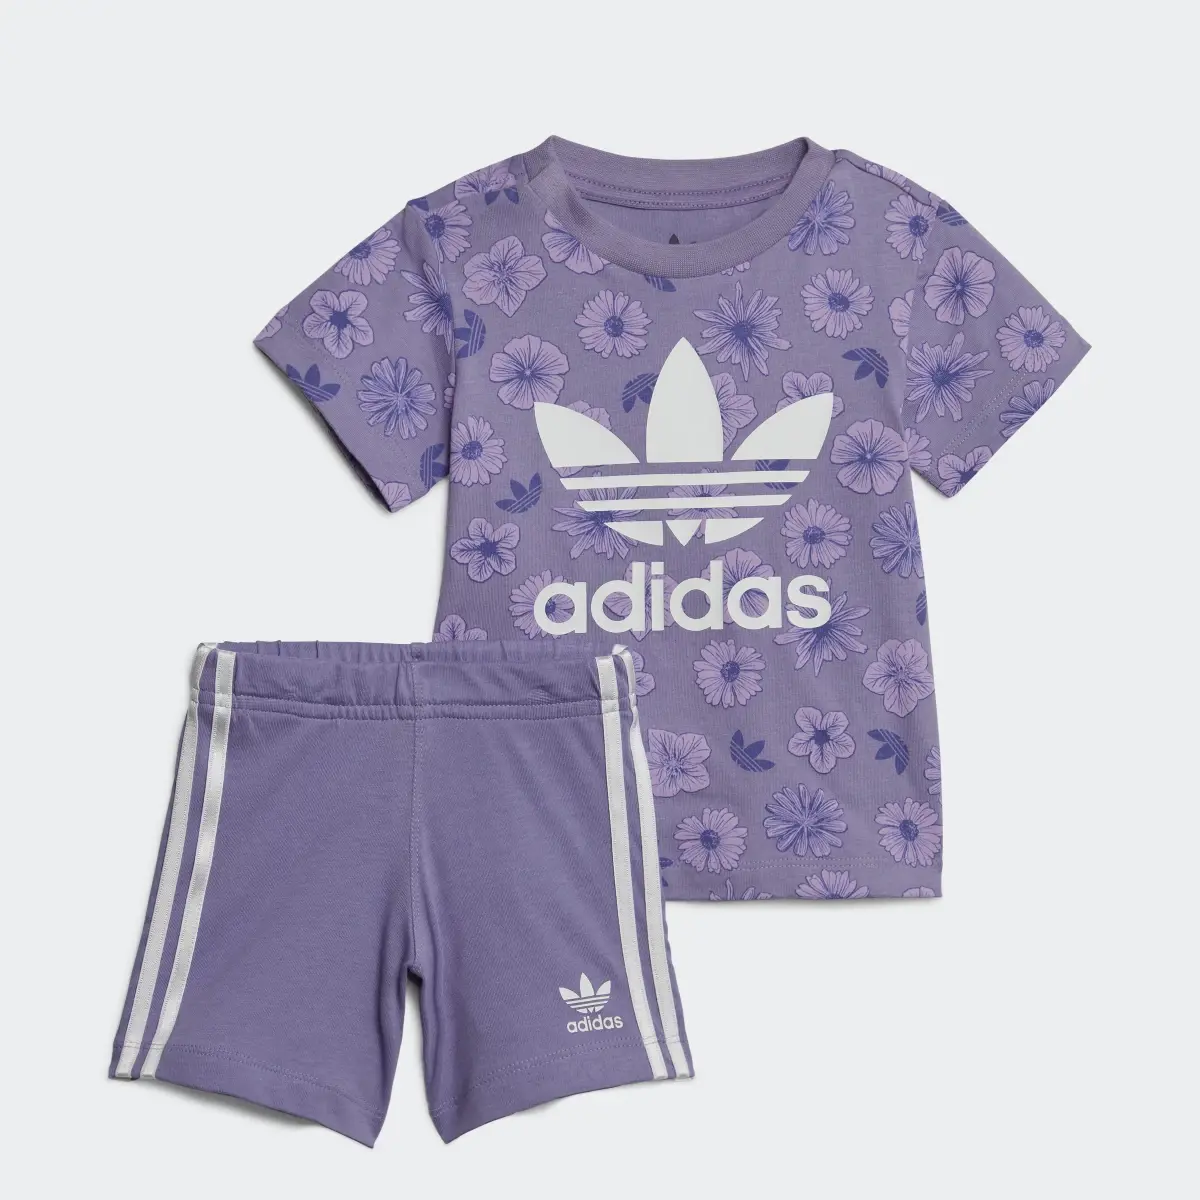 Adidas Completo Floral Tee and Shorts. 1